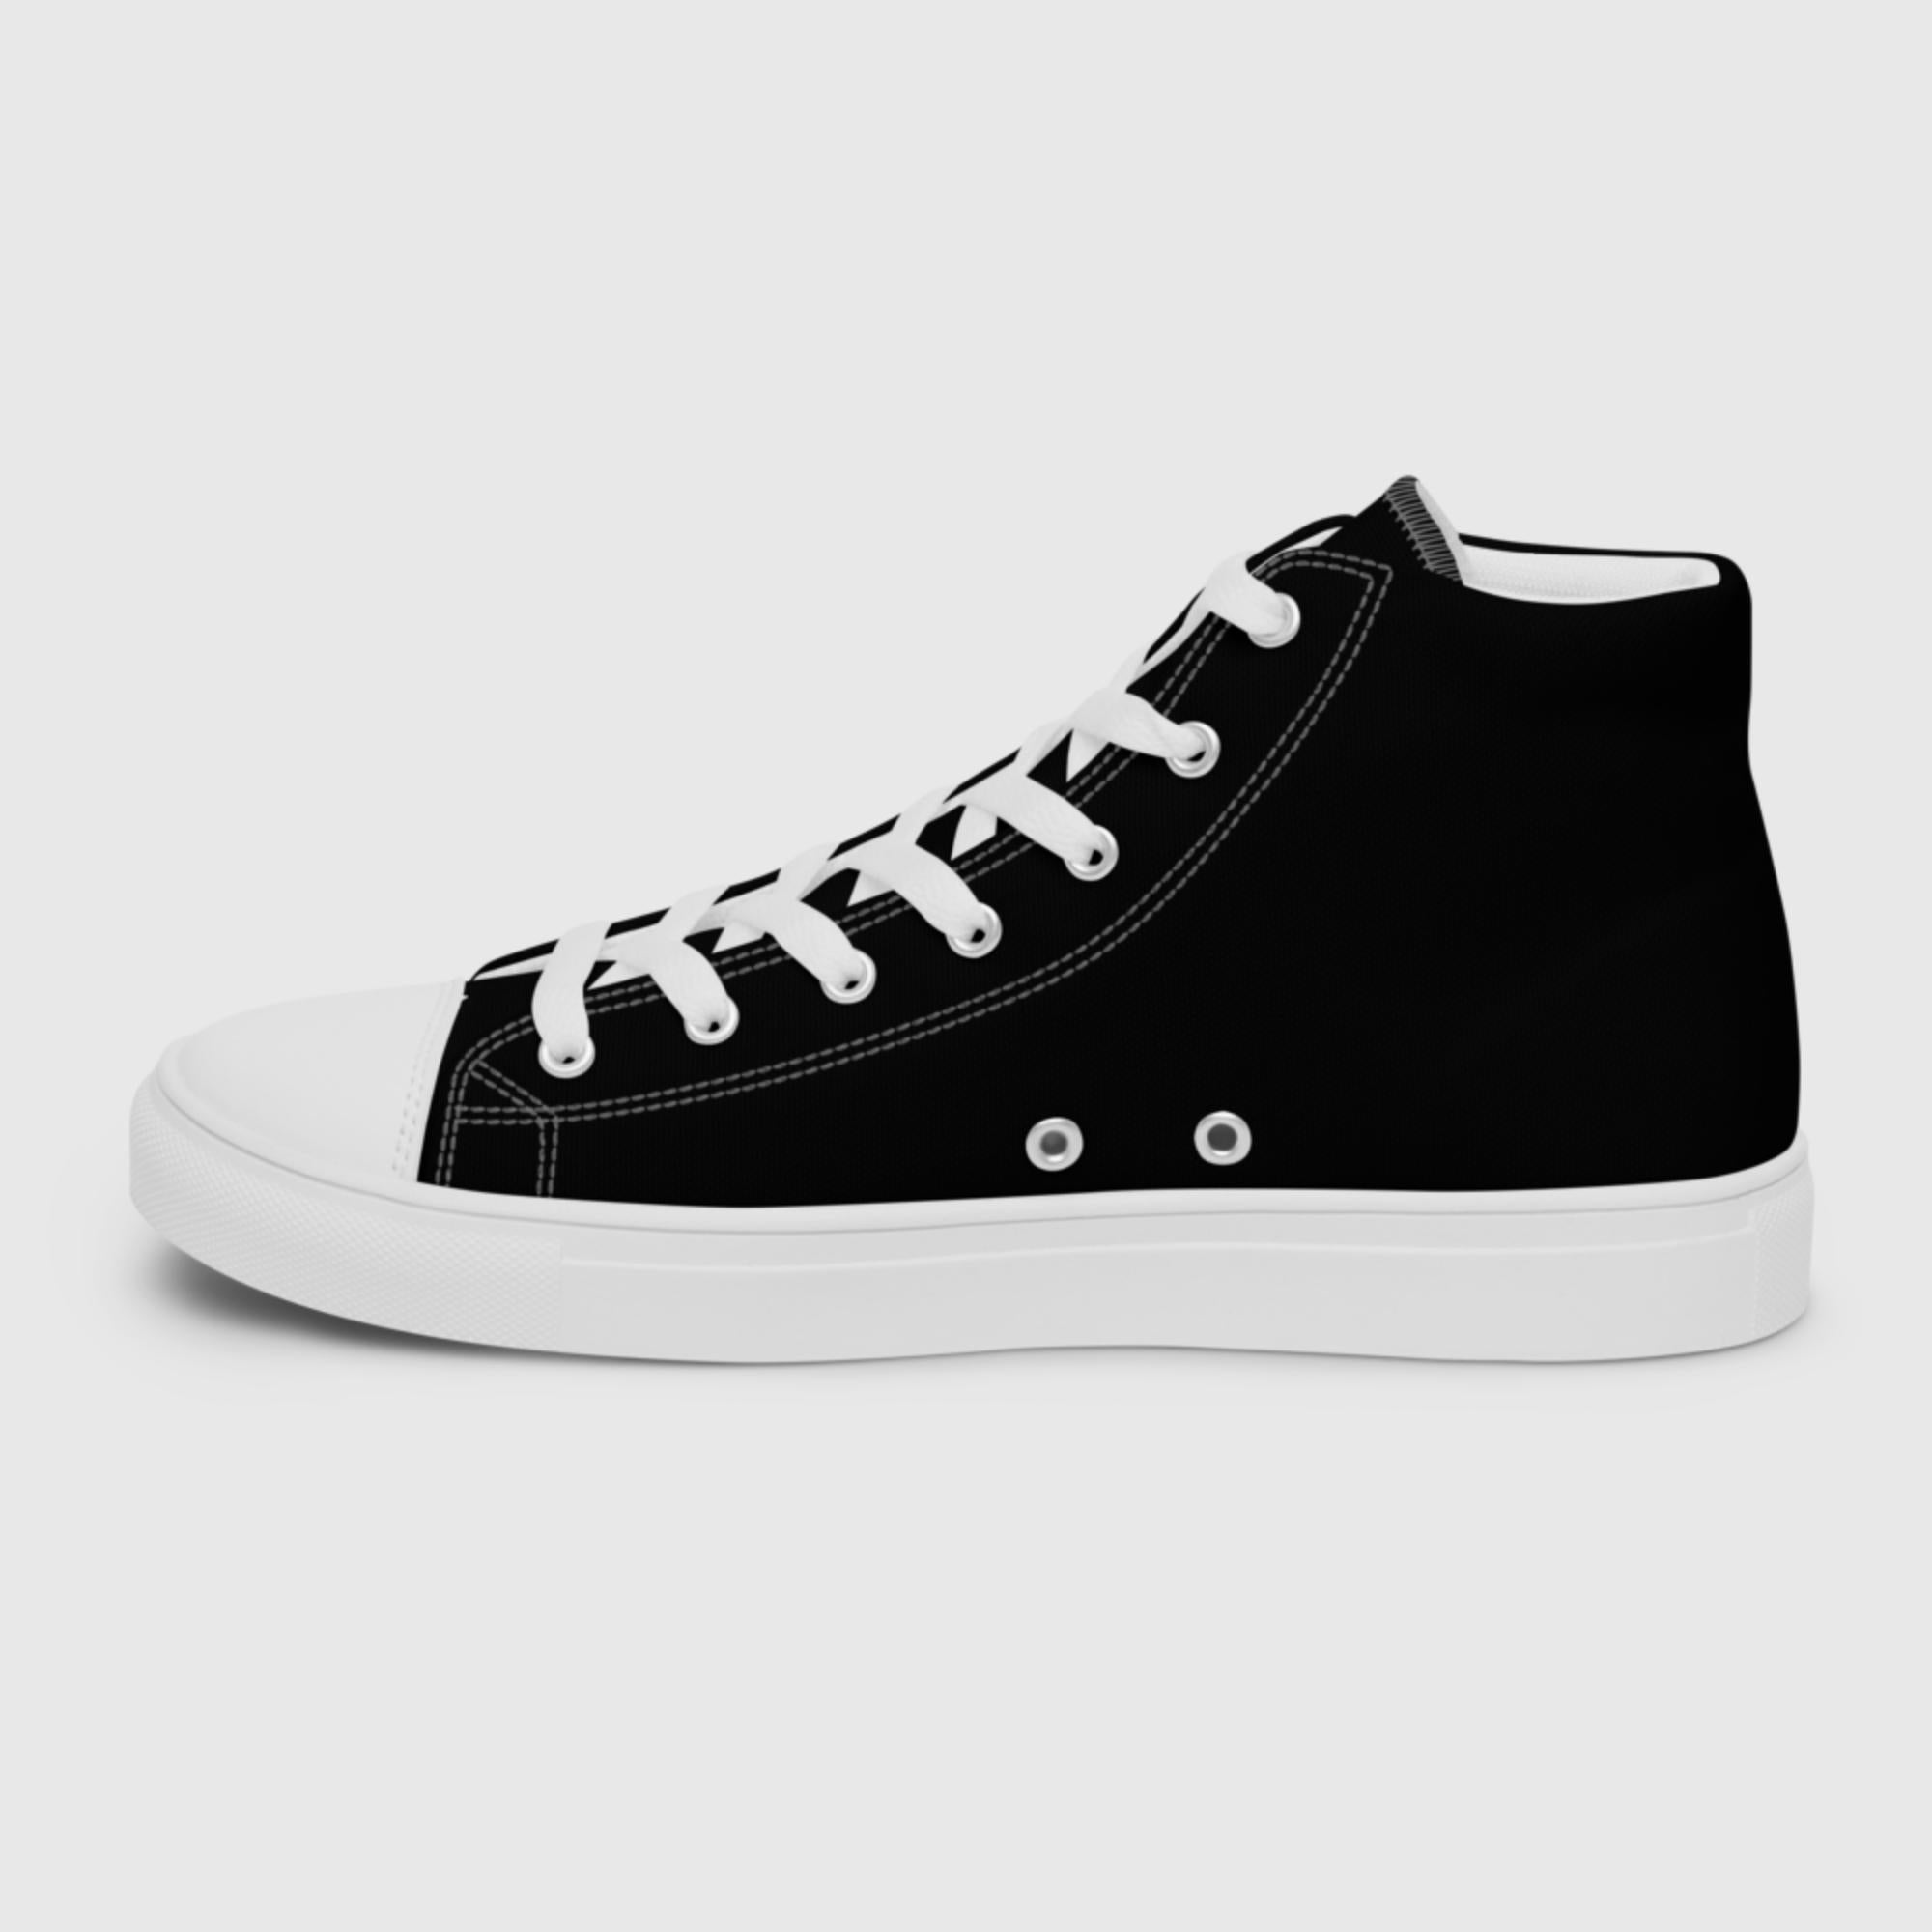 Women’s high top canvas shoes - Black - Sunset Harbor Clothing